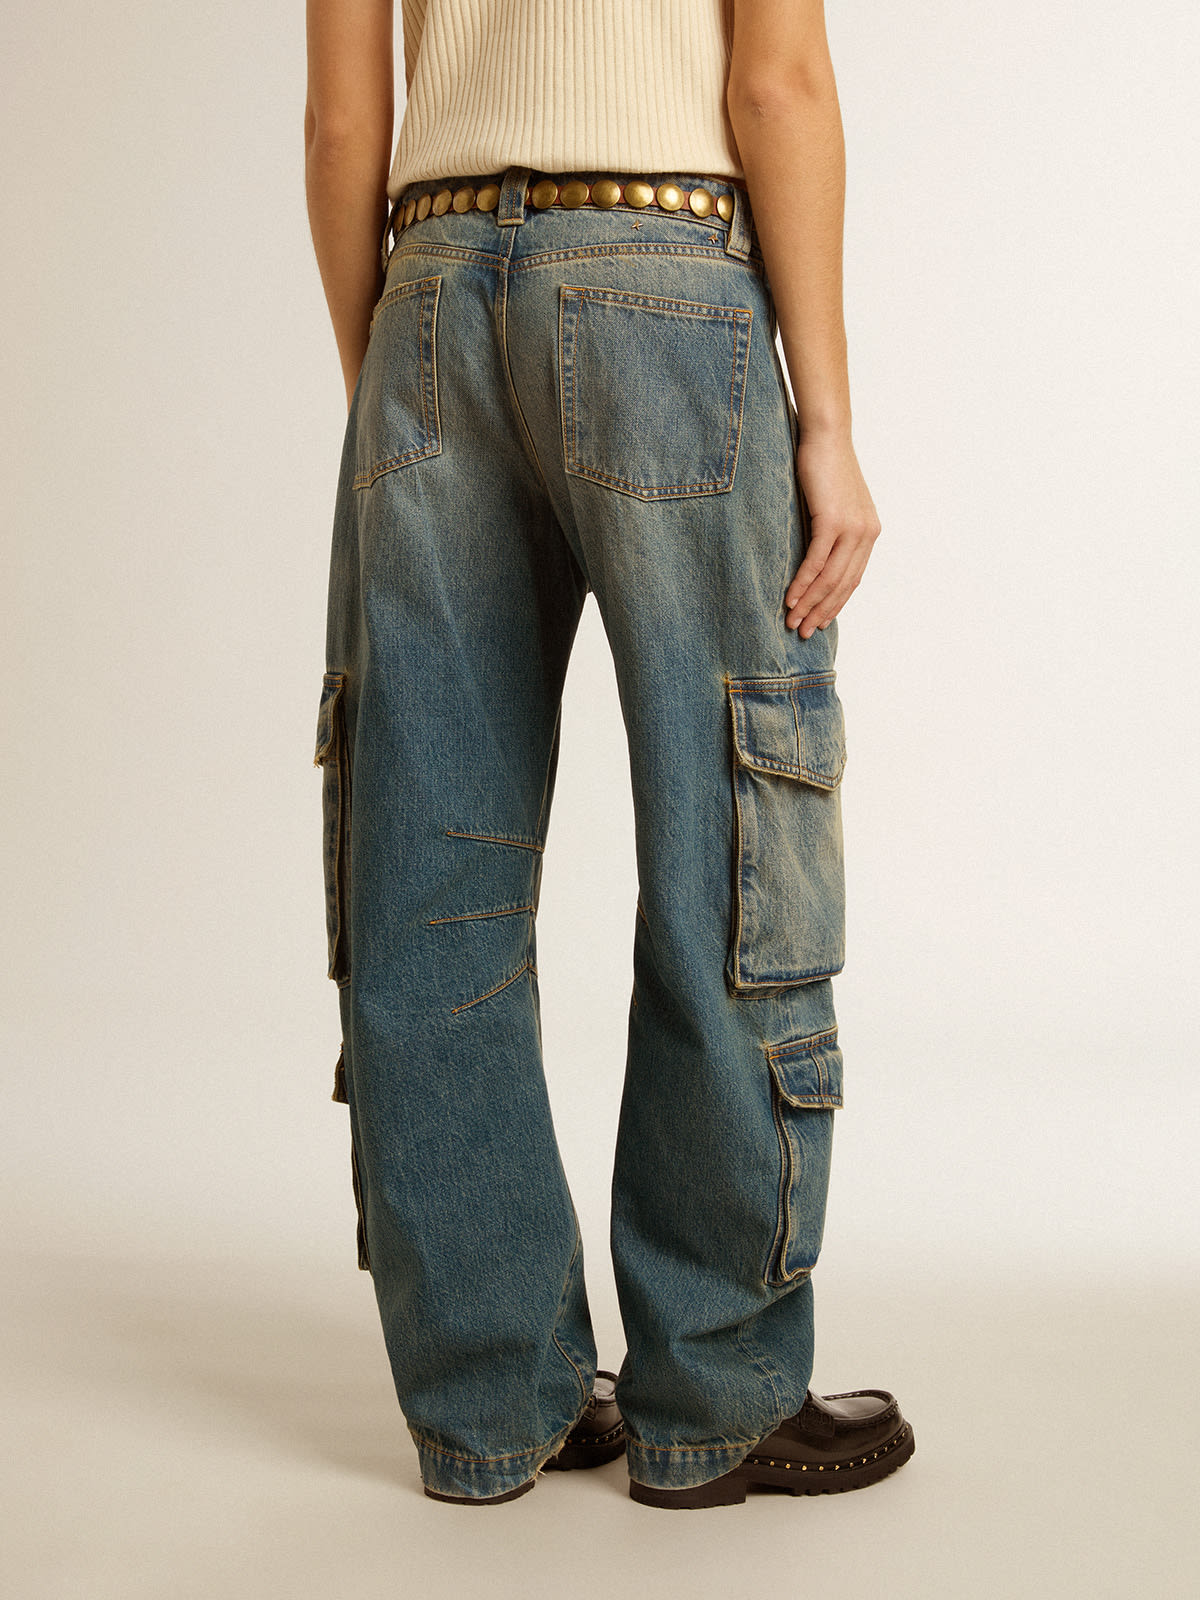 Golden Goose - Blue jeans with a distressed finish in 